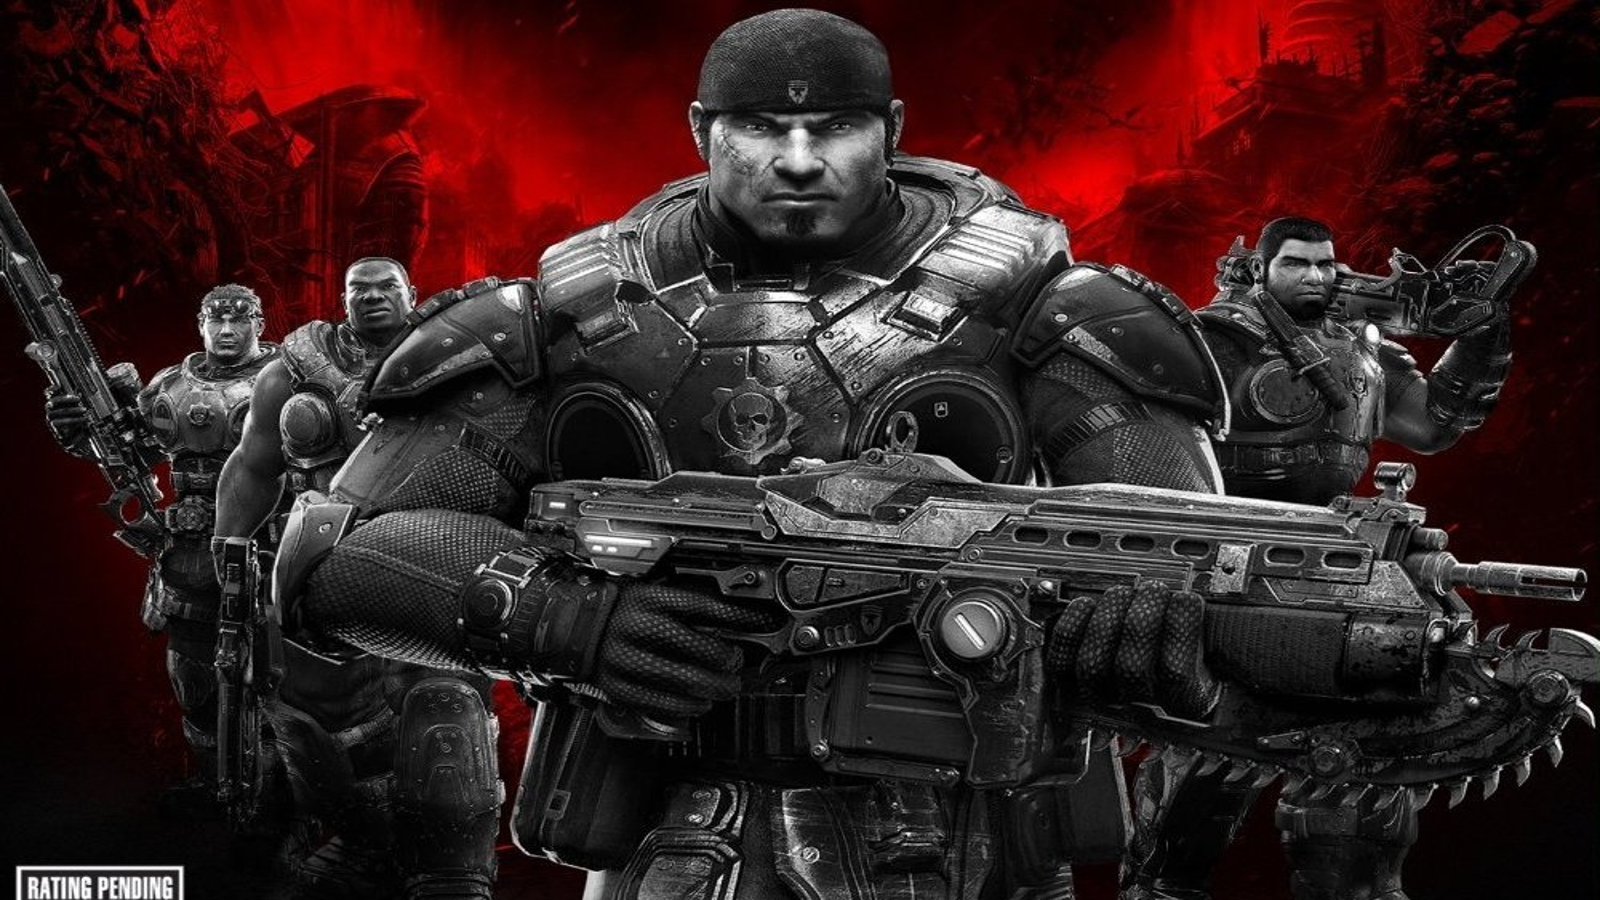 Gears of War 3: Beta Exclusive - Old Town 